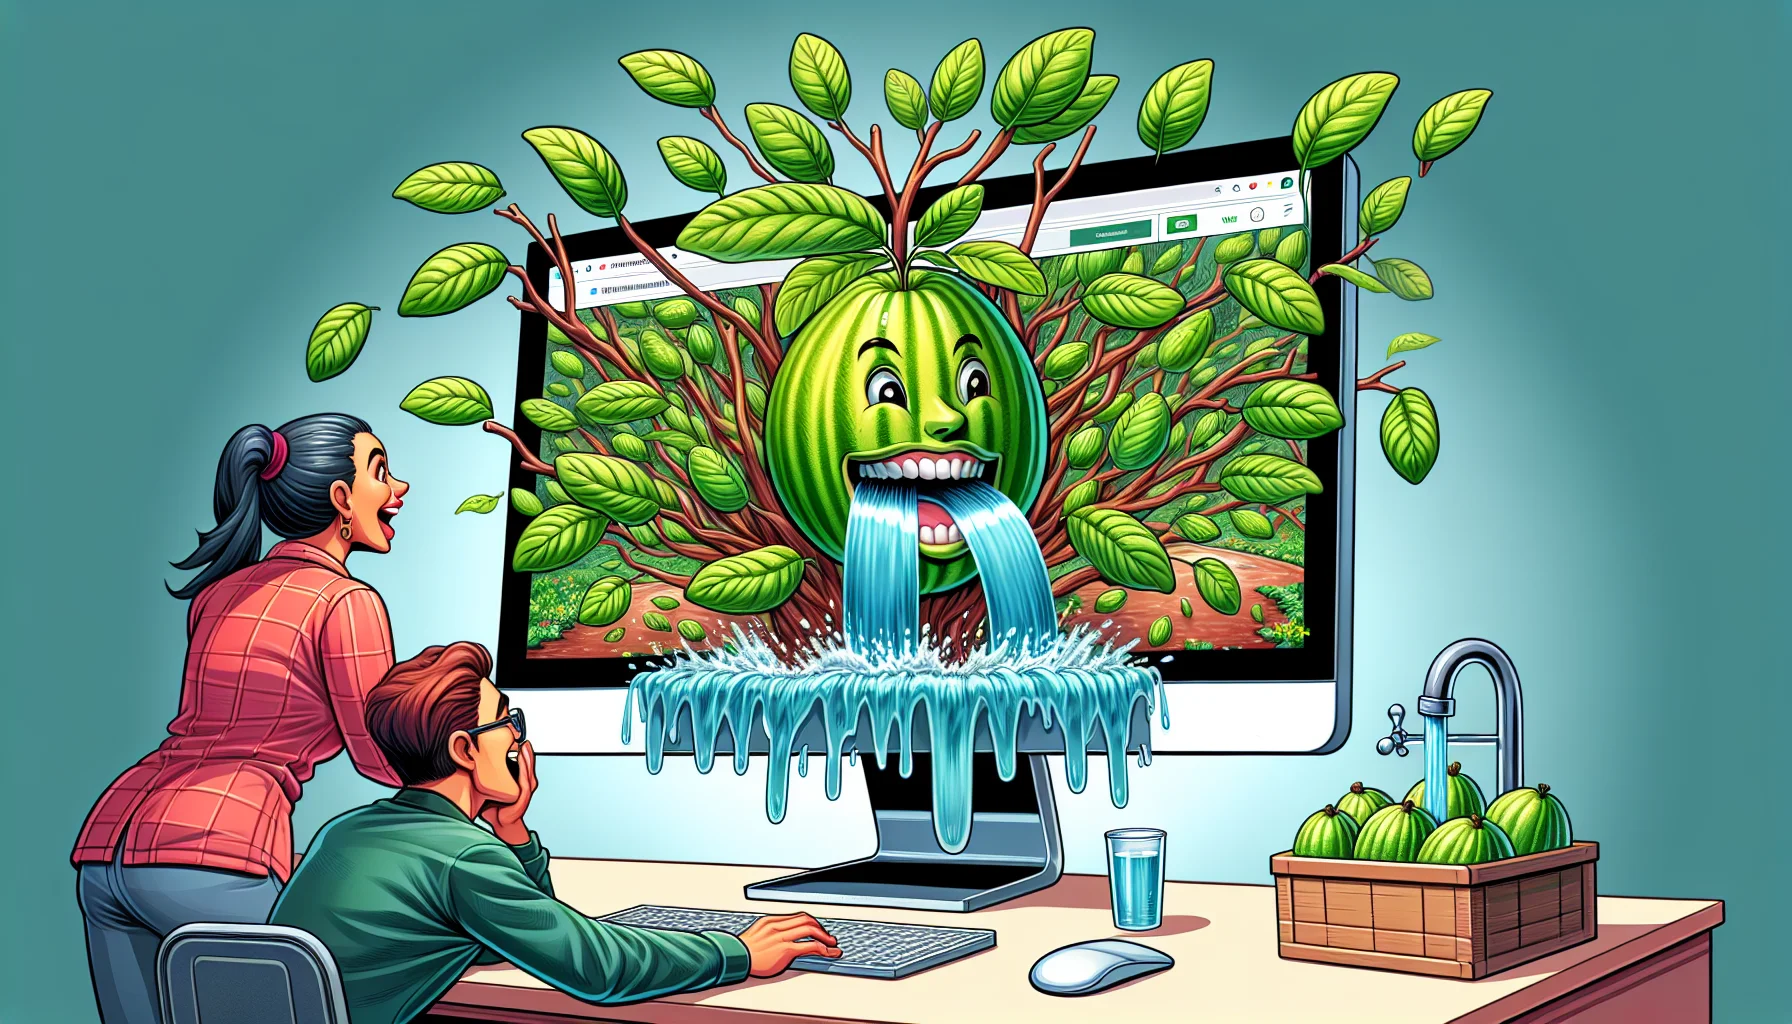 Picture an amusing scene with a webpage titled 'Guava Juice Wiki,' where the entire page seems to have a green thumb. Large, lush, tropical guava leaves are bursting out from the screen edges, making it appear as if the website is sprouting a fruit tree. A stream of animated guava juice flows from a tap on the screen, forming a pool at the base of the monitor. There are two people observing this phenomenal event. One is an Hispanic woman, in her late 40s, laughing, and the other is a Middle-Eastern man, in his early 30s, in utter awe. This image should inspire viewers to take up gardening while enjoying the fun of surfing.